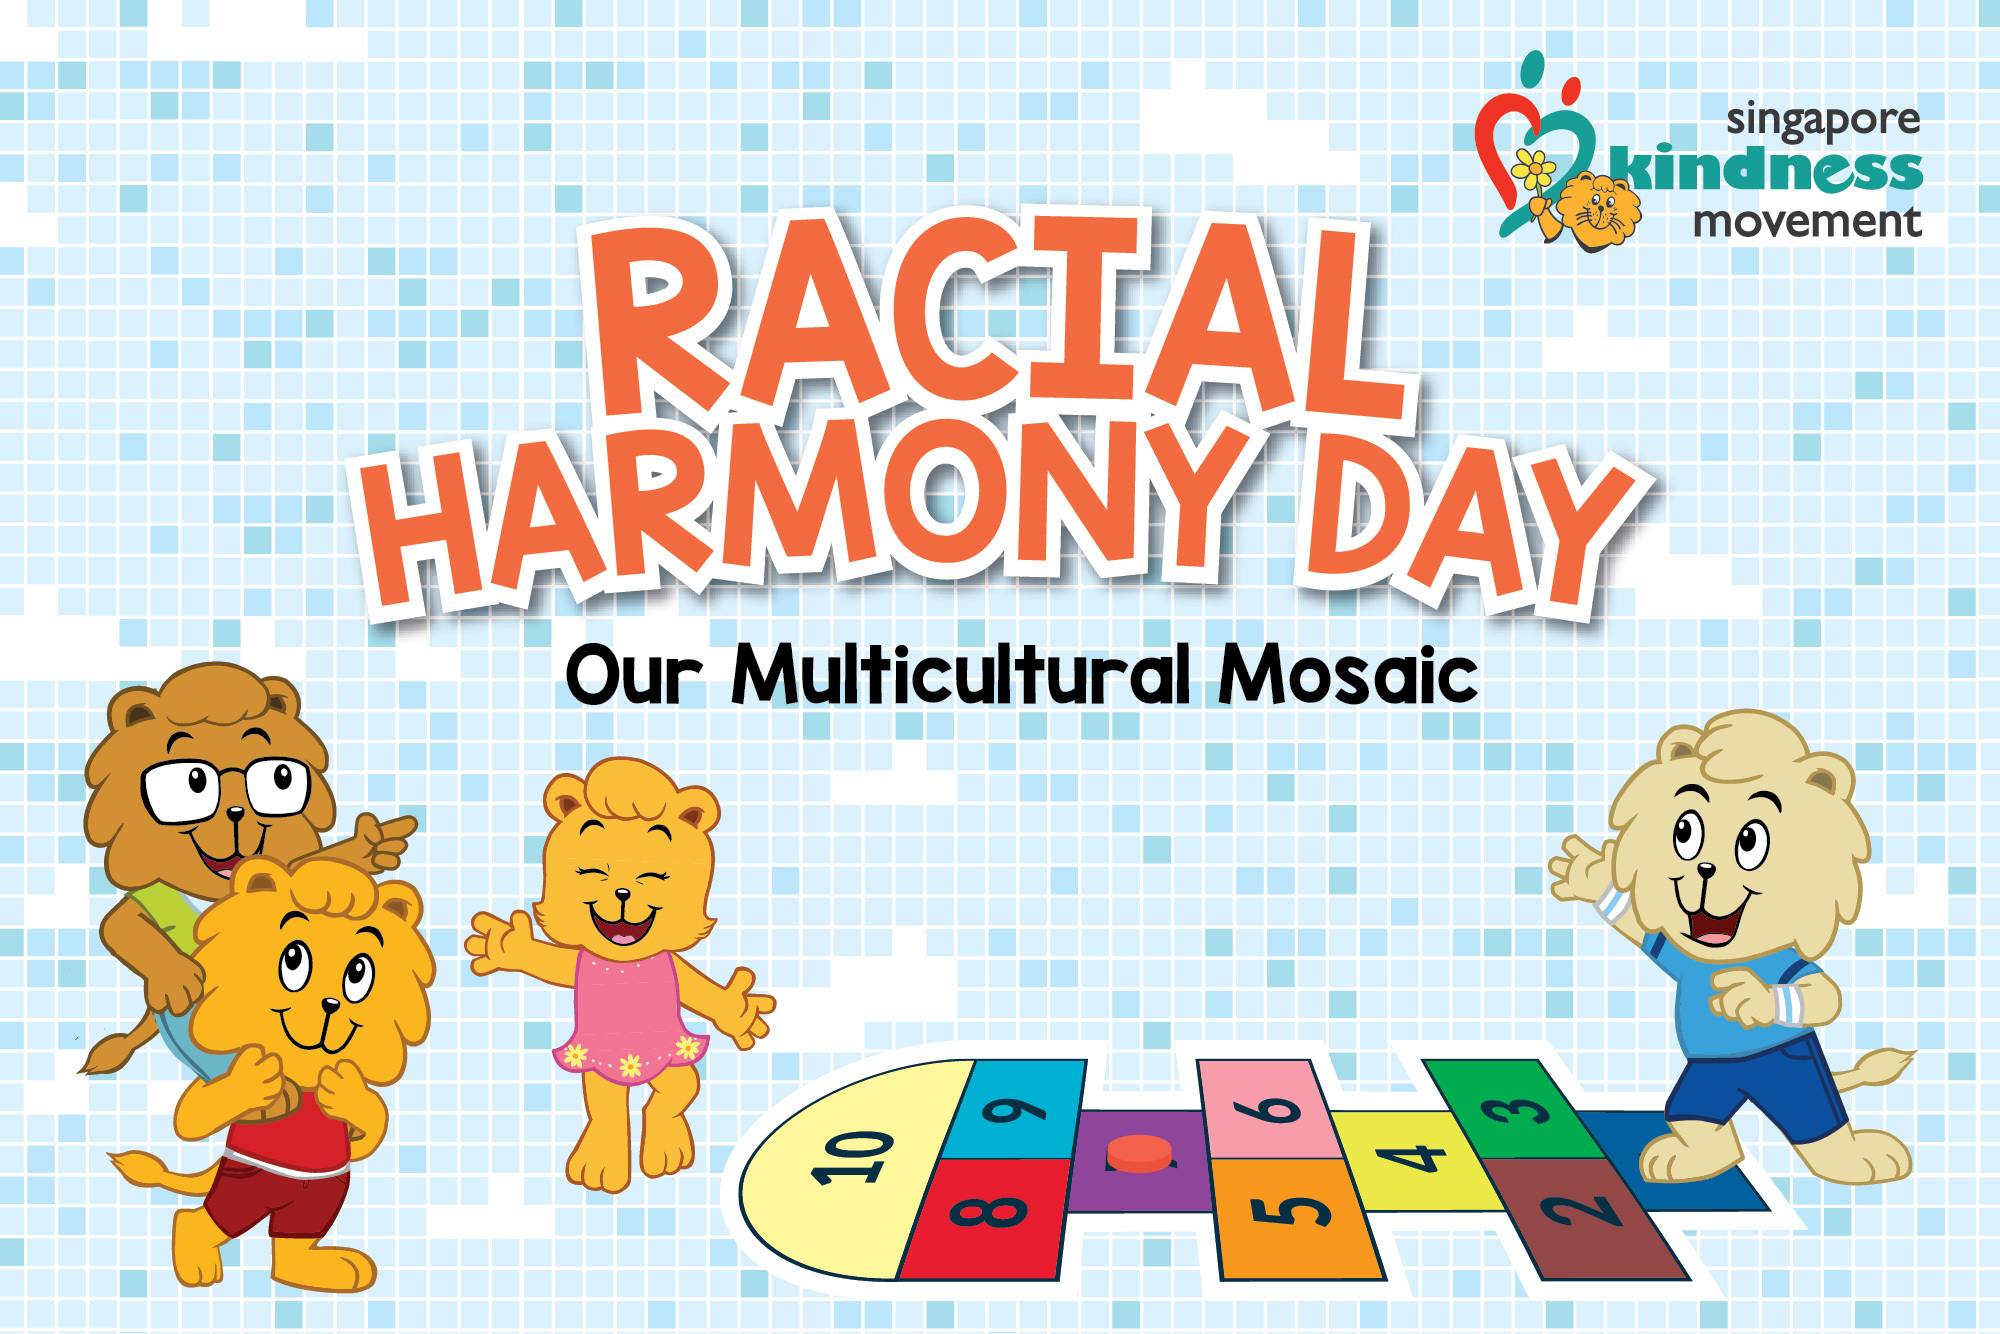 Want to talk about racial harmony with your child? Start here